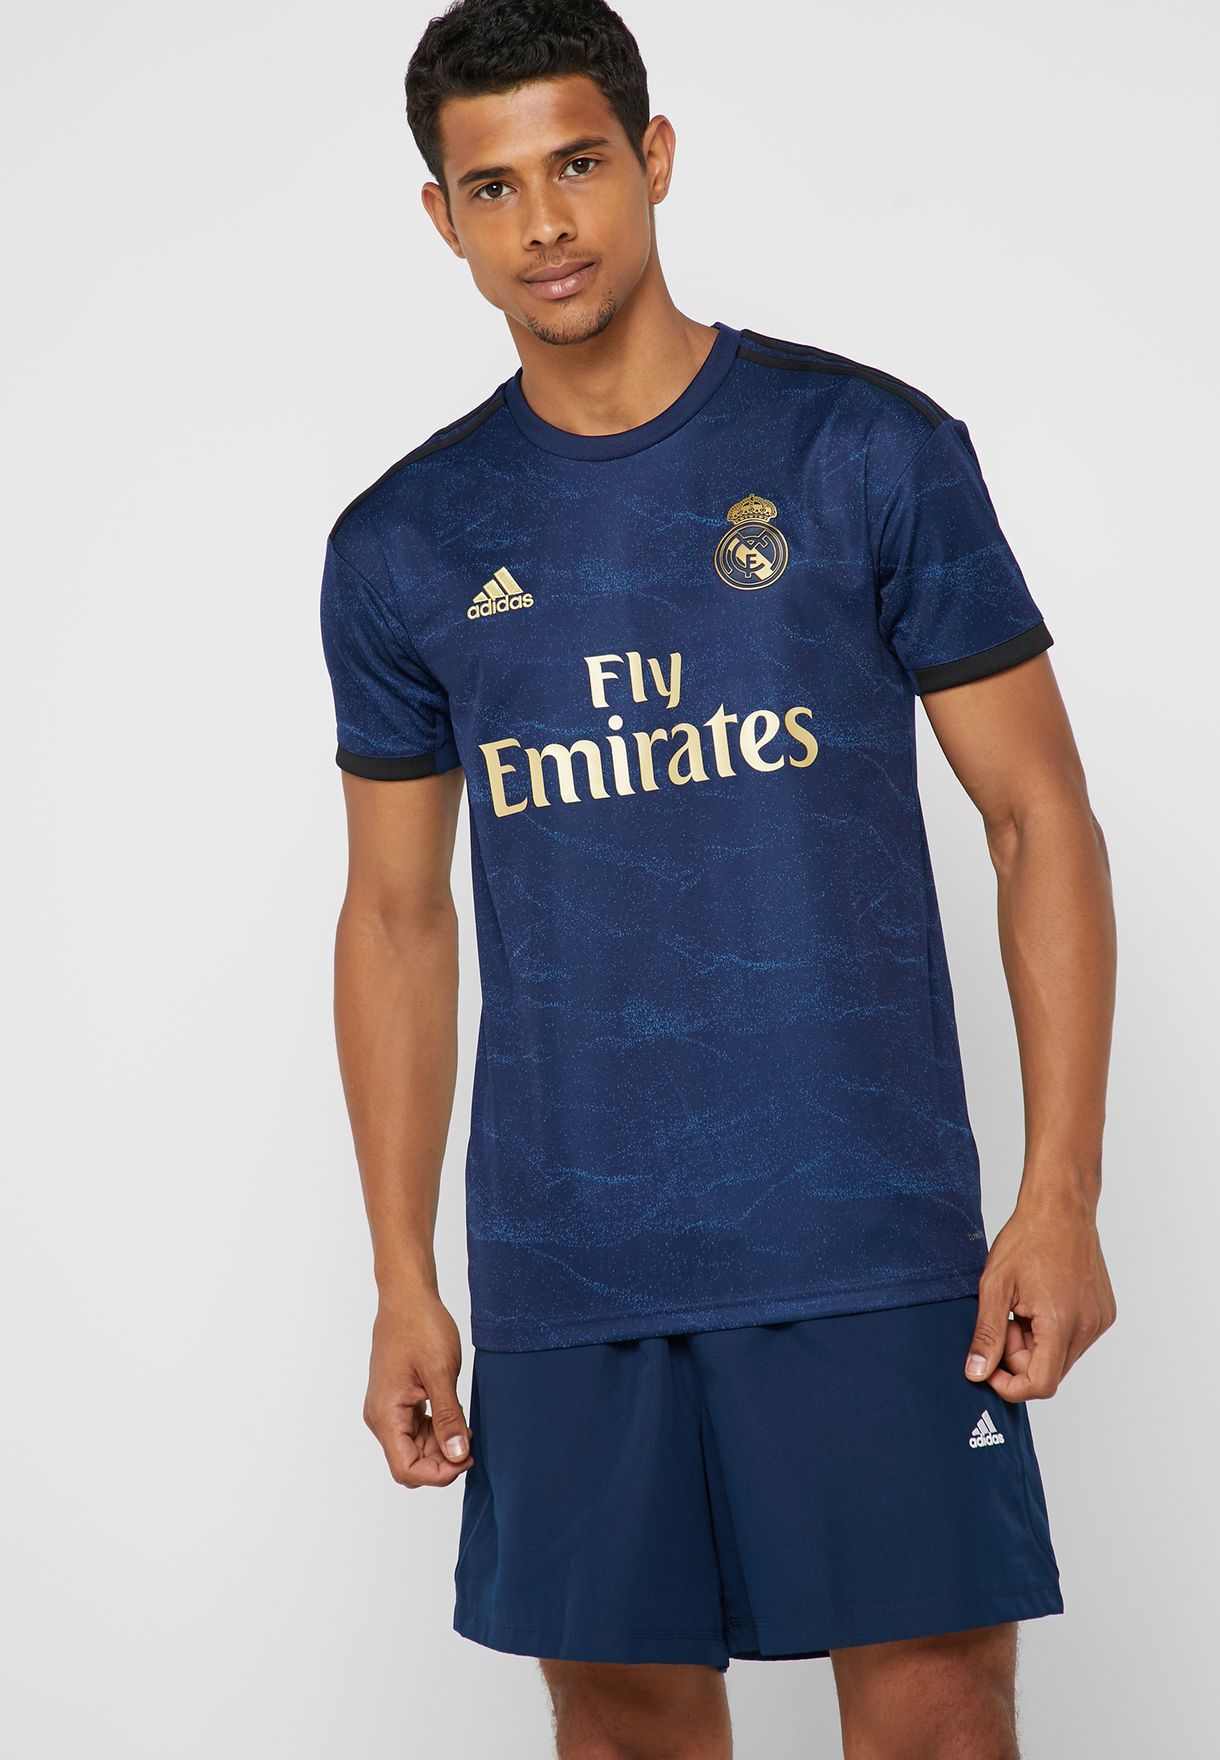 real madrid jersey navy blue